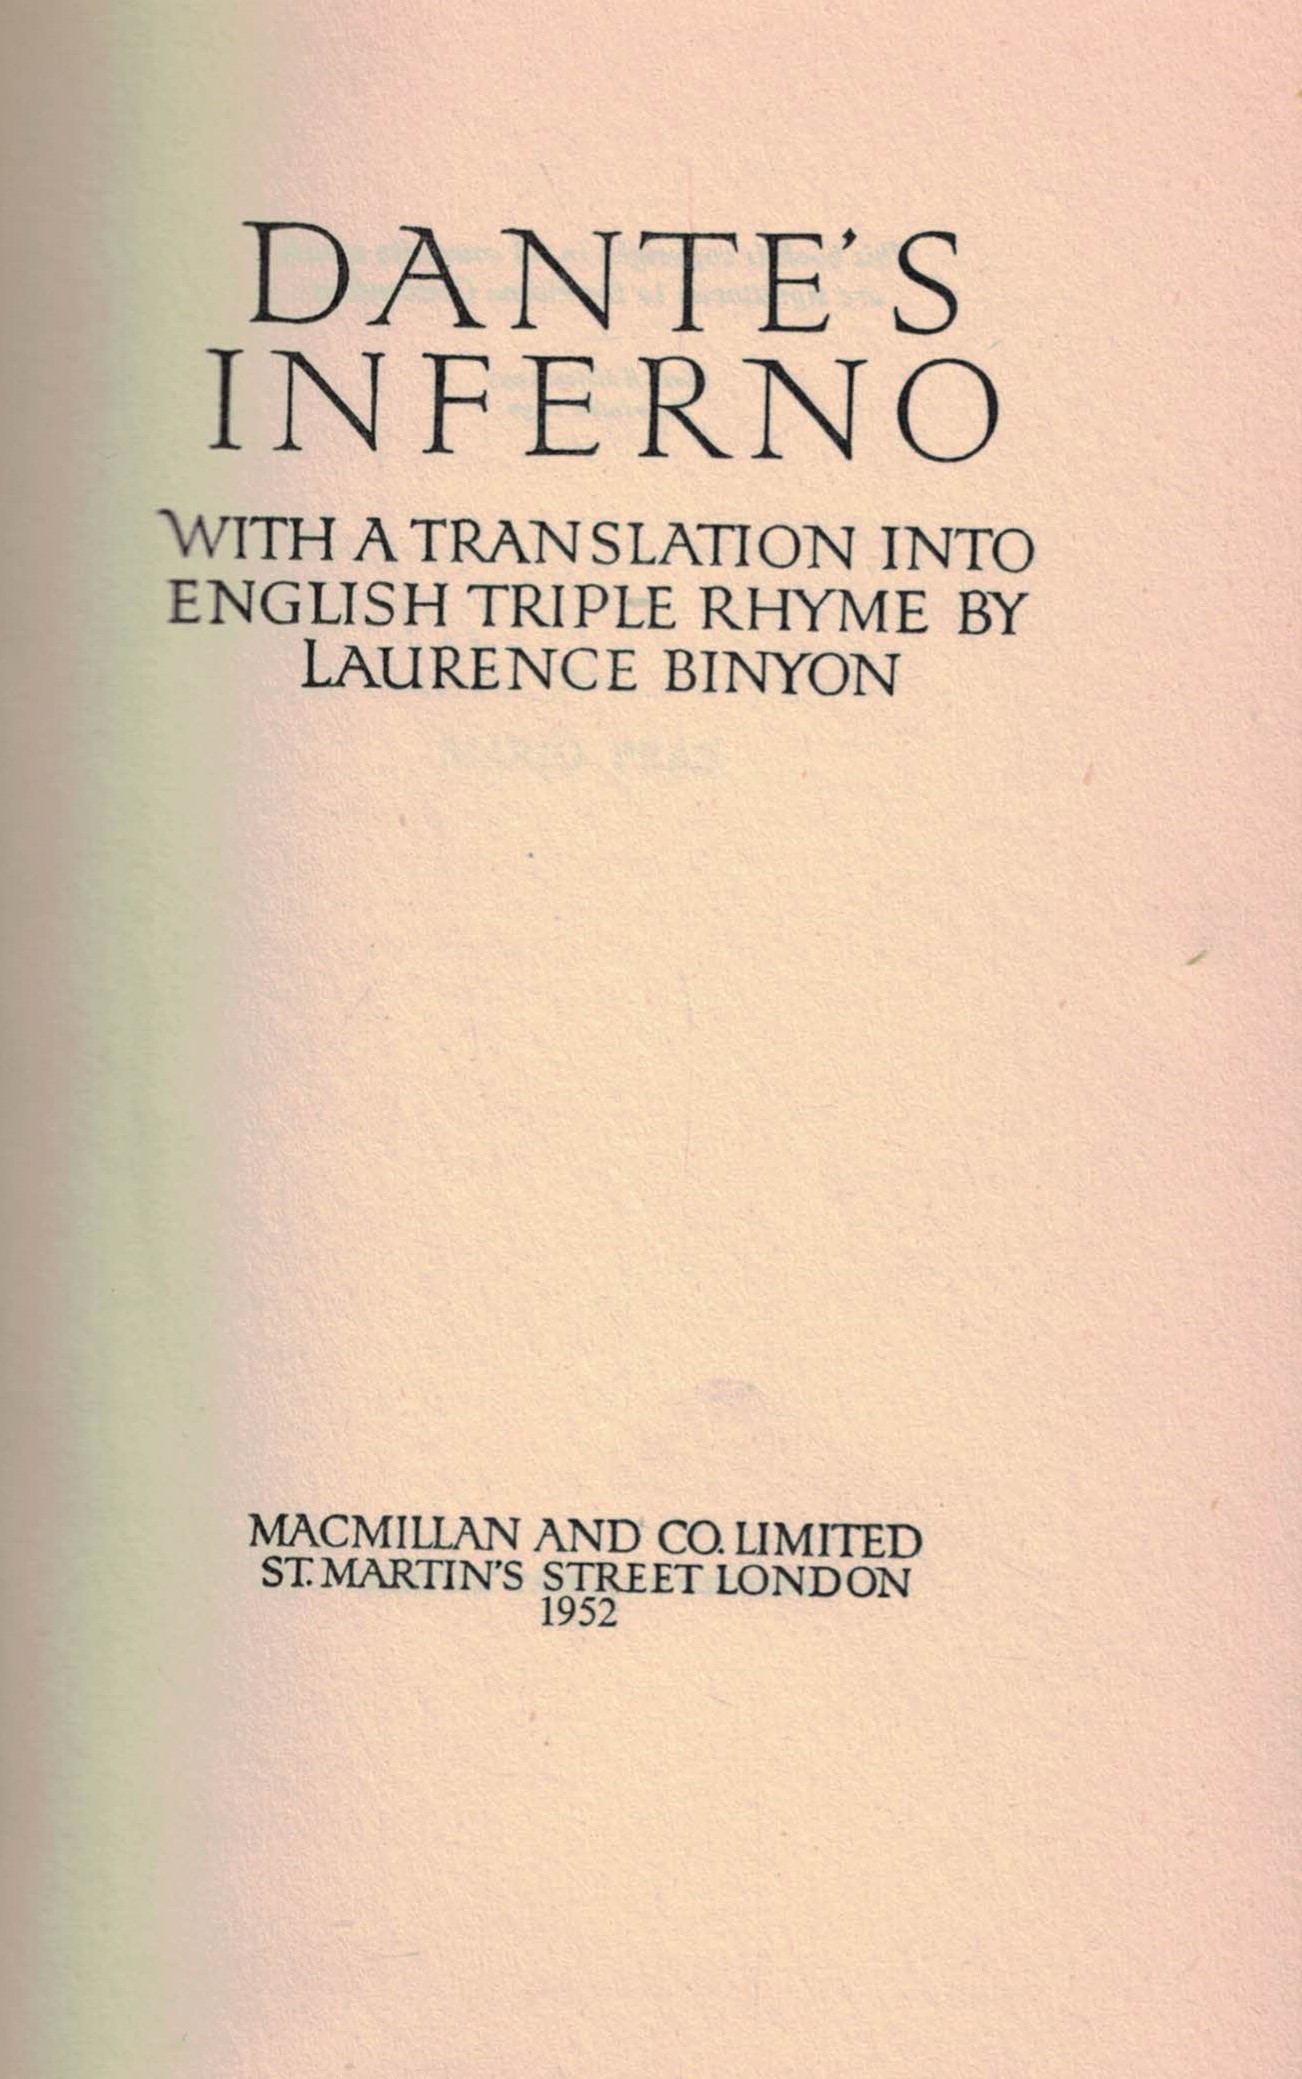 Dante's Inferno. With a Translation Into English Triple Rhyme.